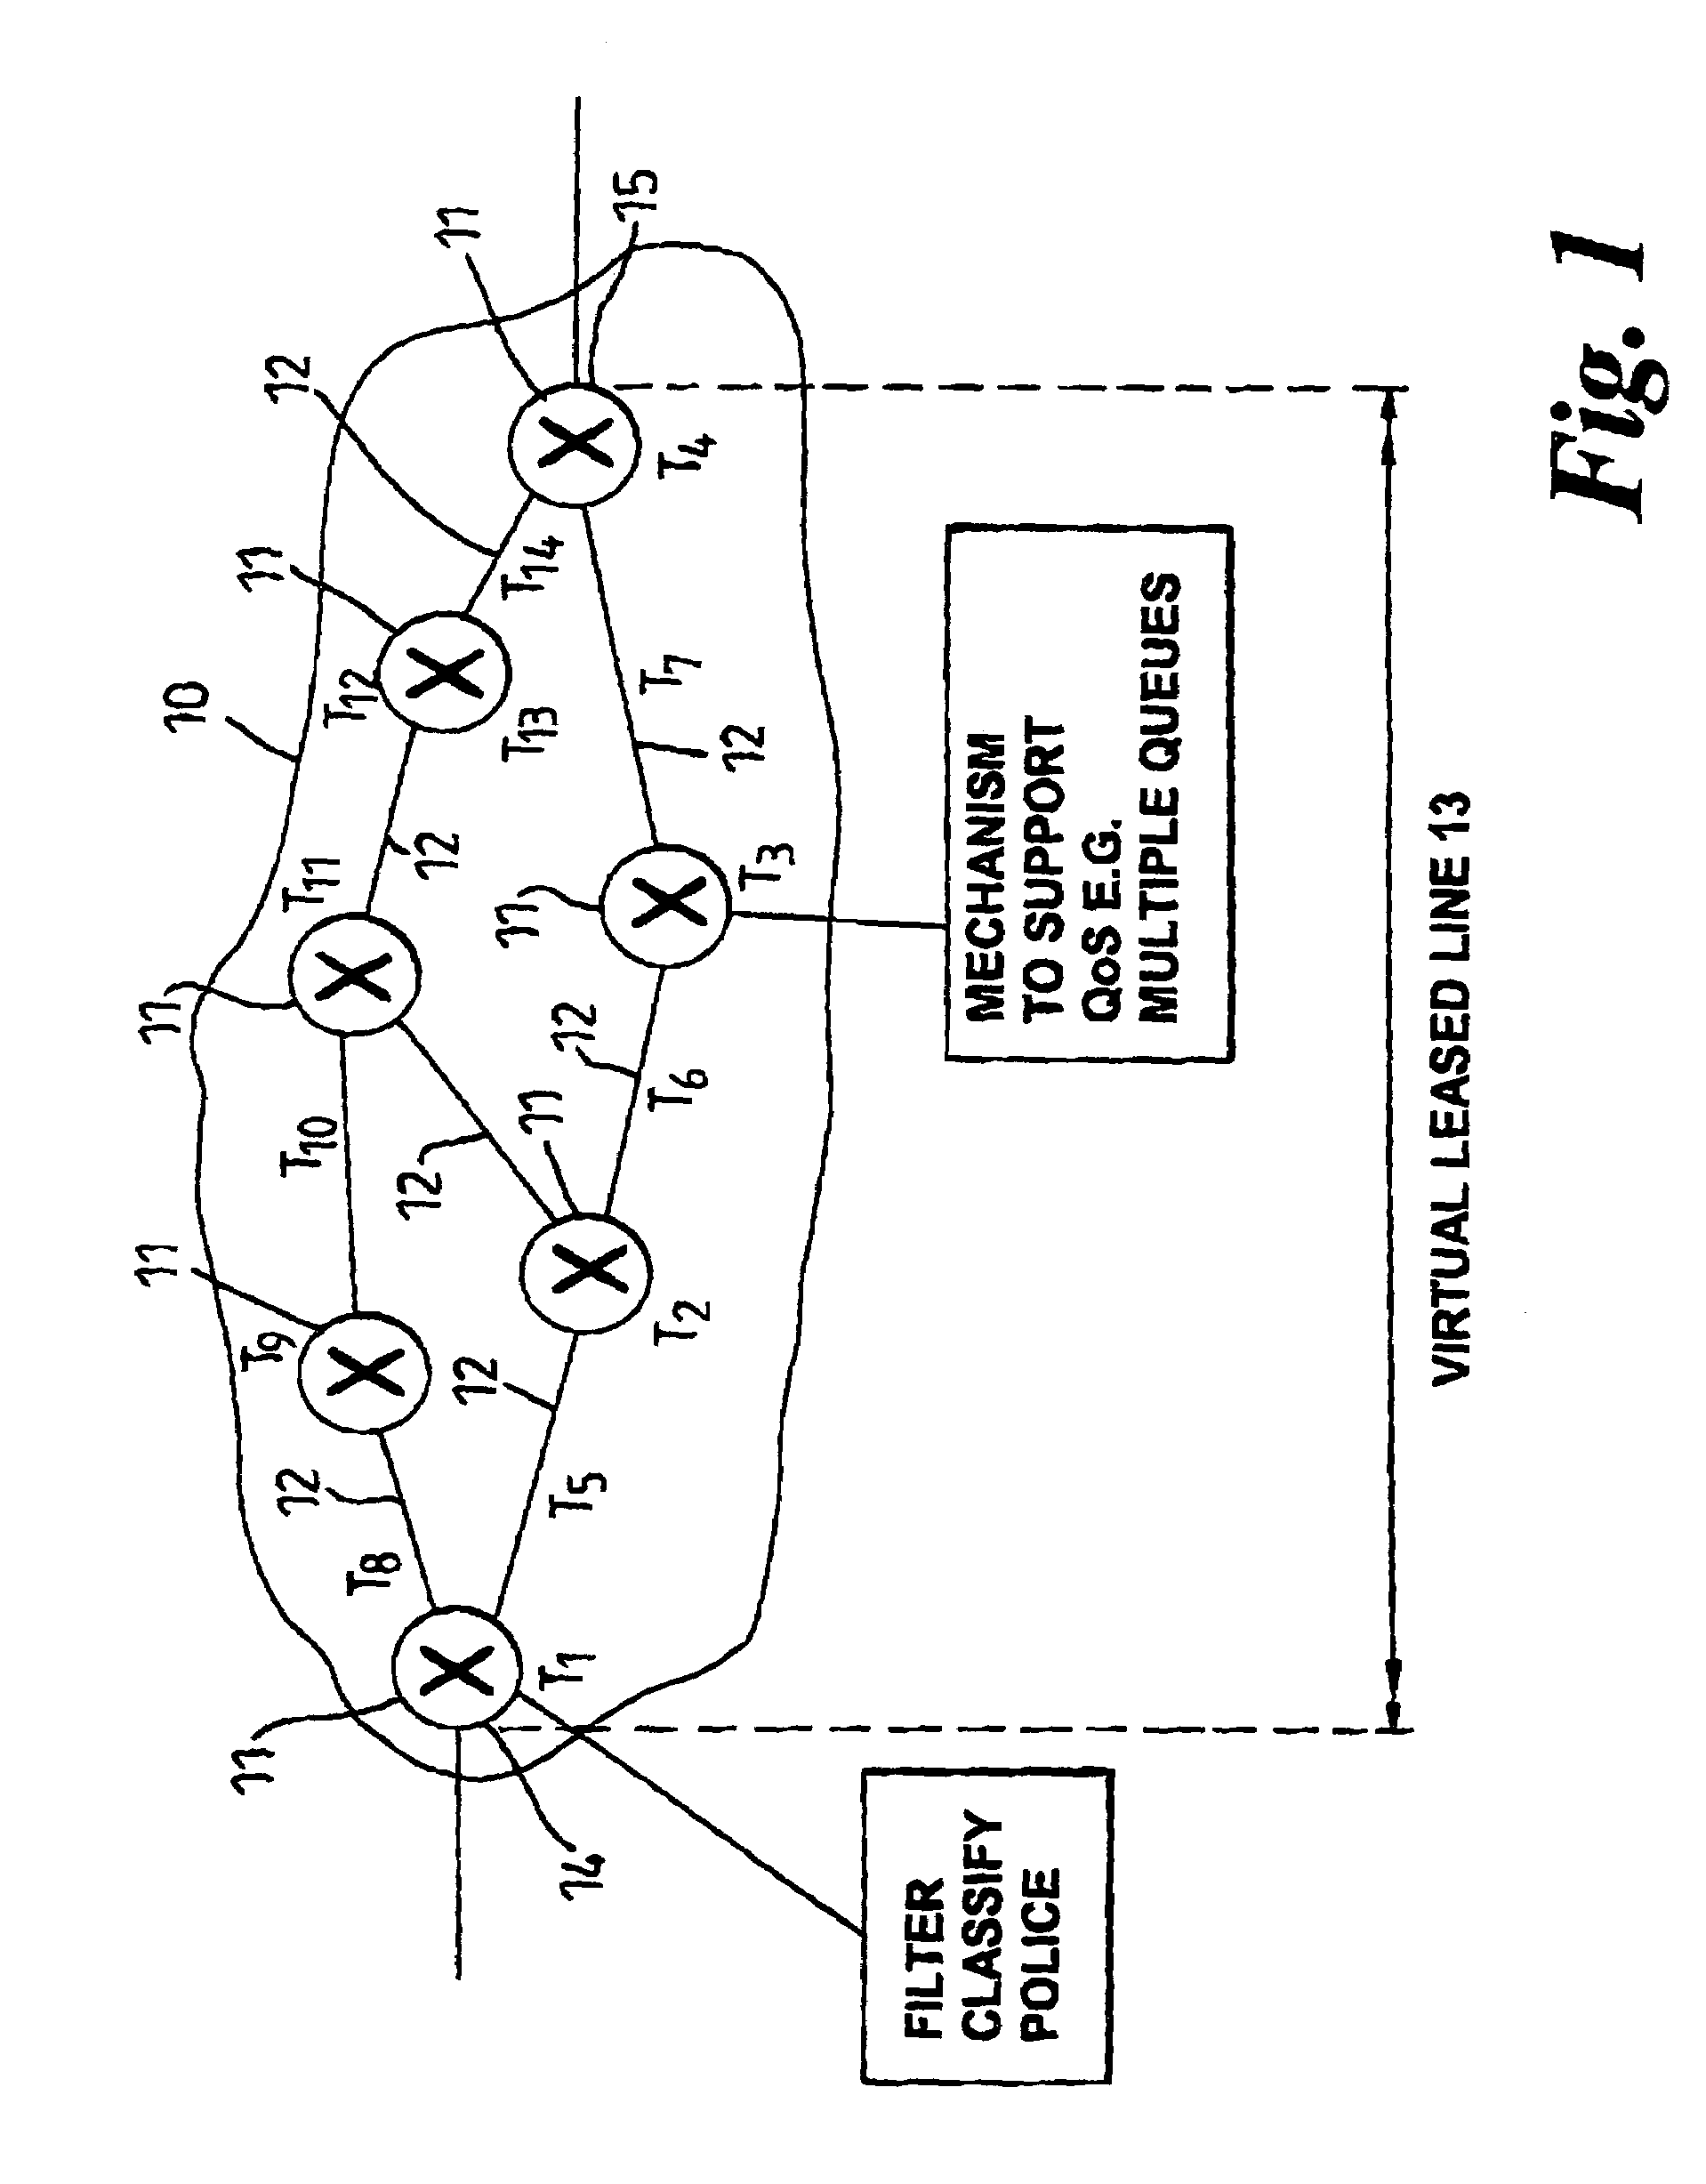 Method of provisioning a route in a connectionless communications network such that a guaranteed quality of service is provided